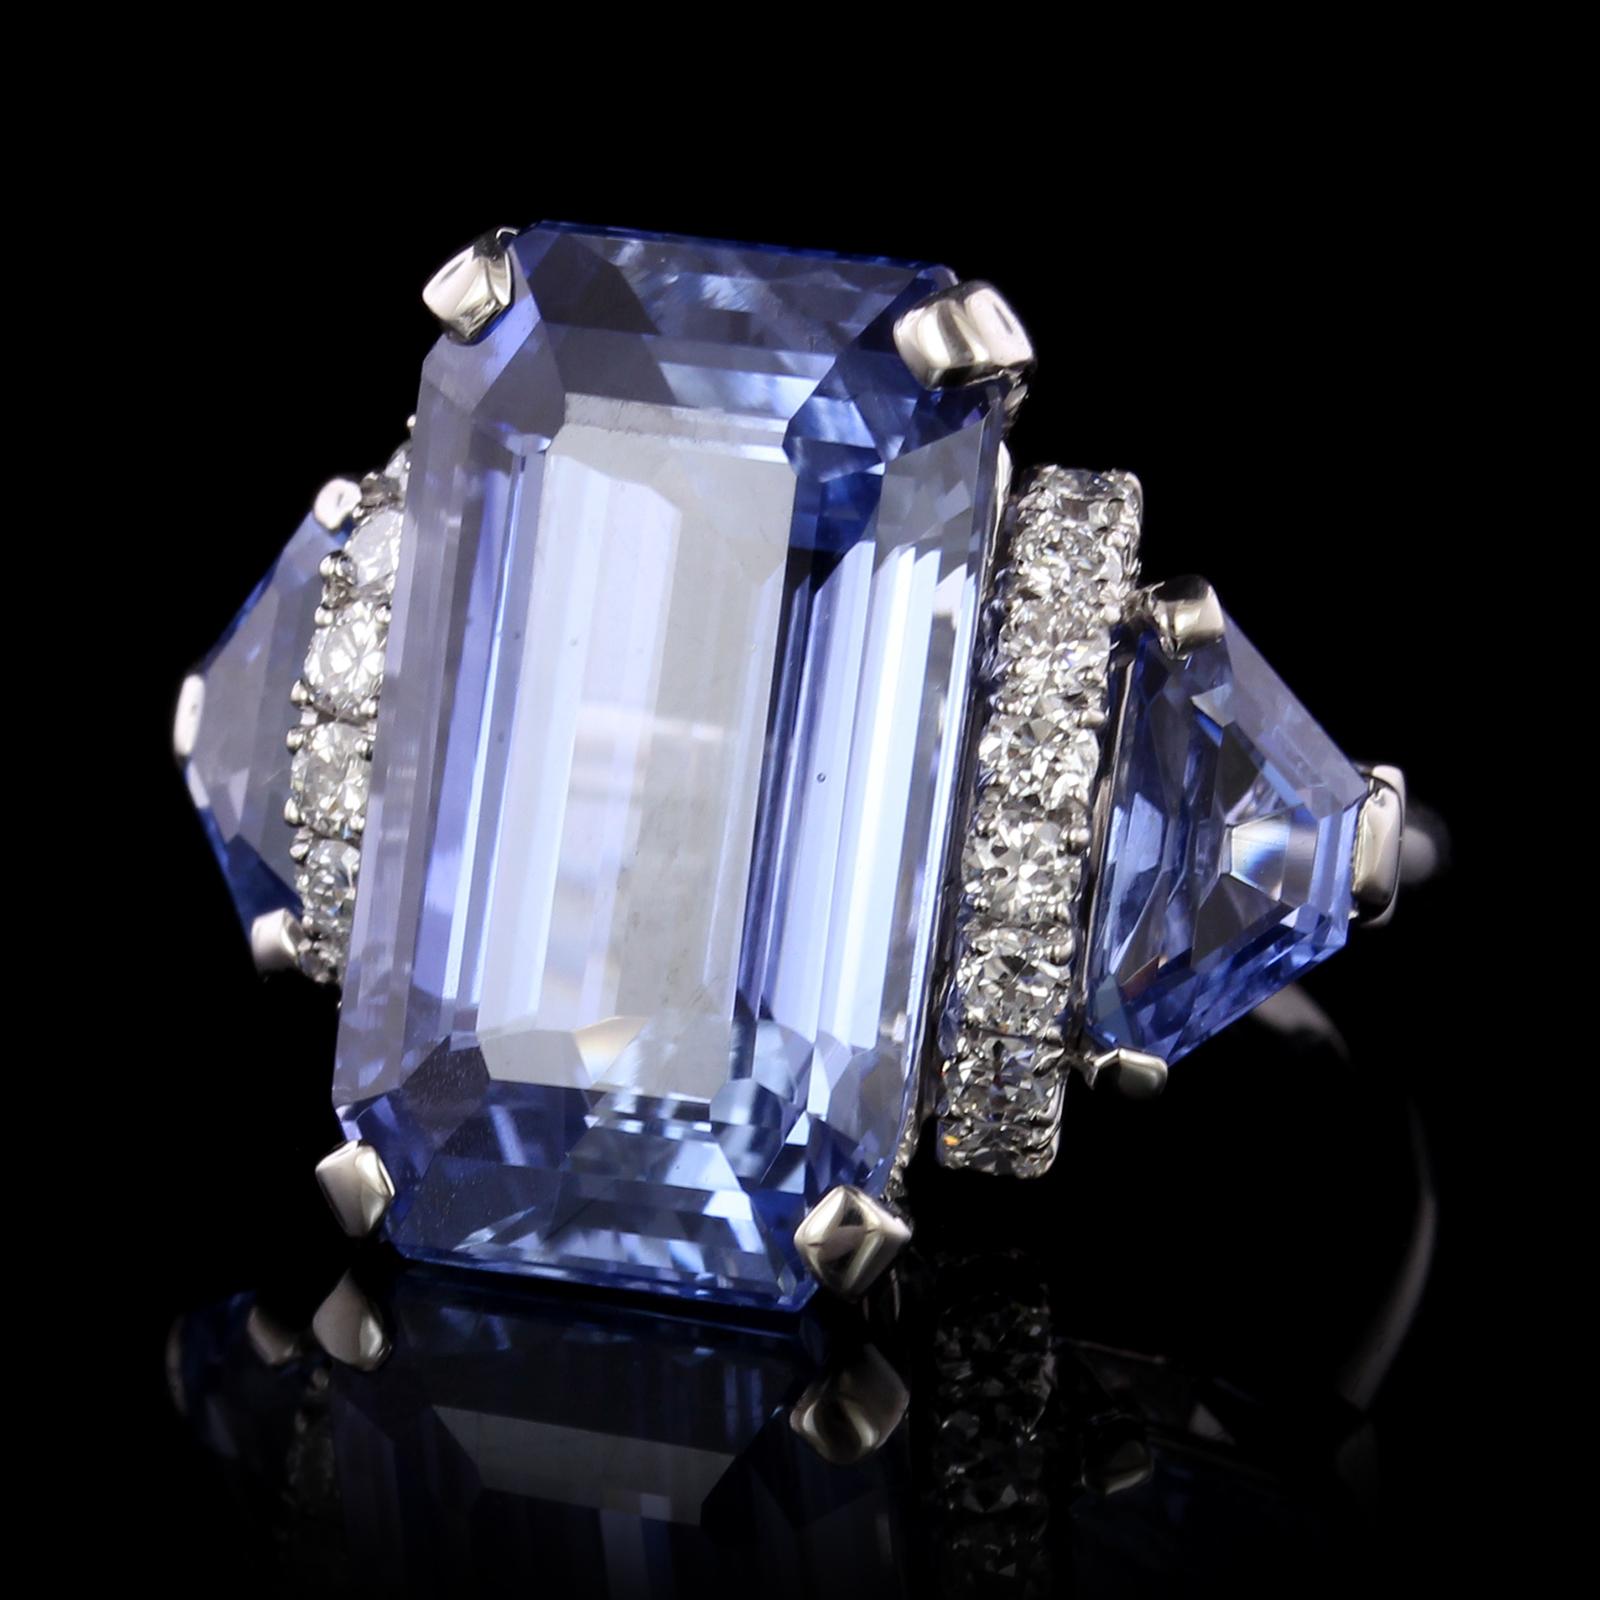 Oscar Heyman Platinum Sapphire and Diamond Ring. The ring is set with one
emerald cut sapphire weighing 19.52cts., AGL #1084837, no heat, origin Ceylon, and
two sheild cut sapphires weighing 1.28cts., and 1.38cts., AGL #108662 A & B, no heat, origin